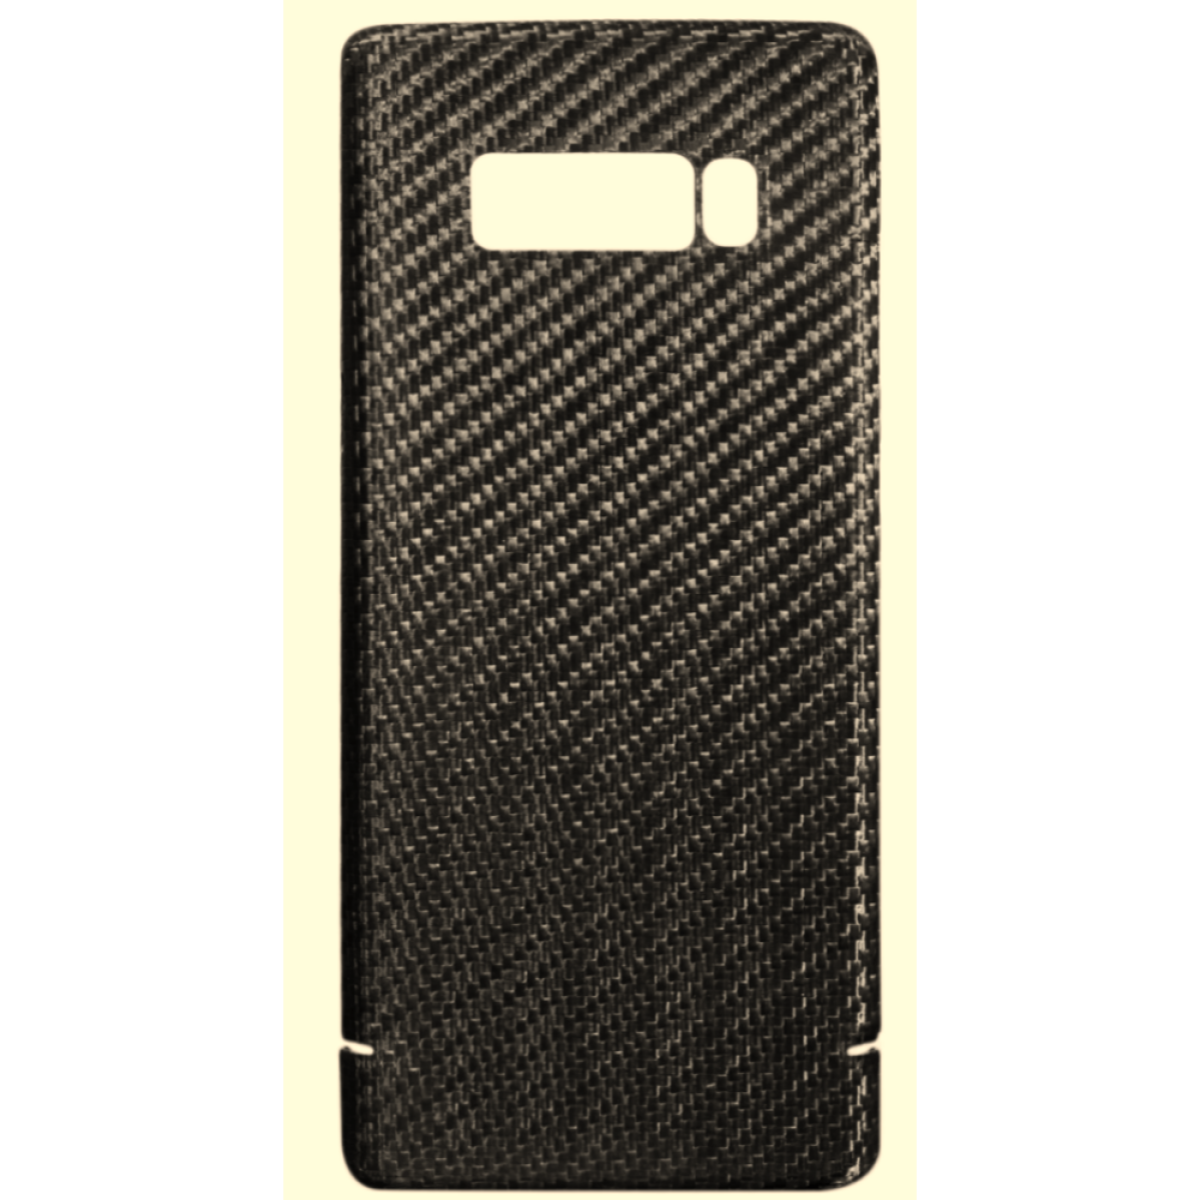 Carbon 8, Not available Universal, Cover, Note Universal, Viversis Full Cover